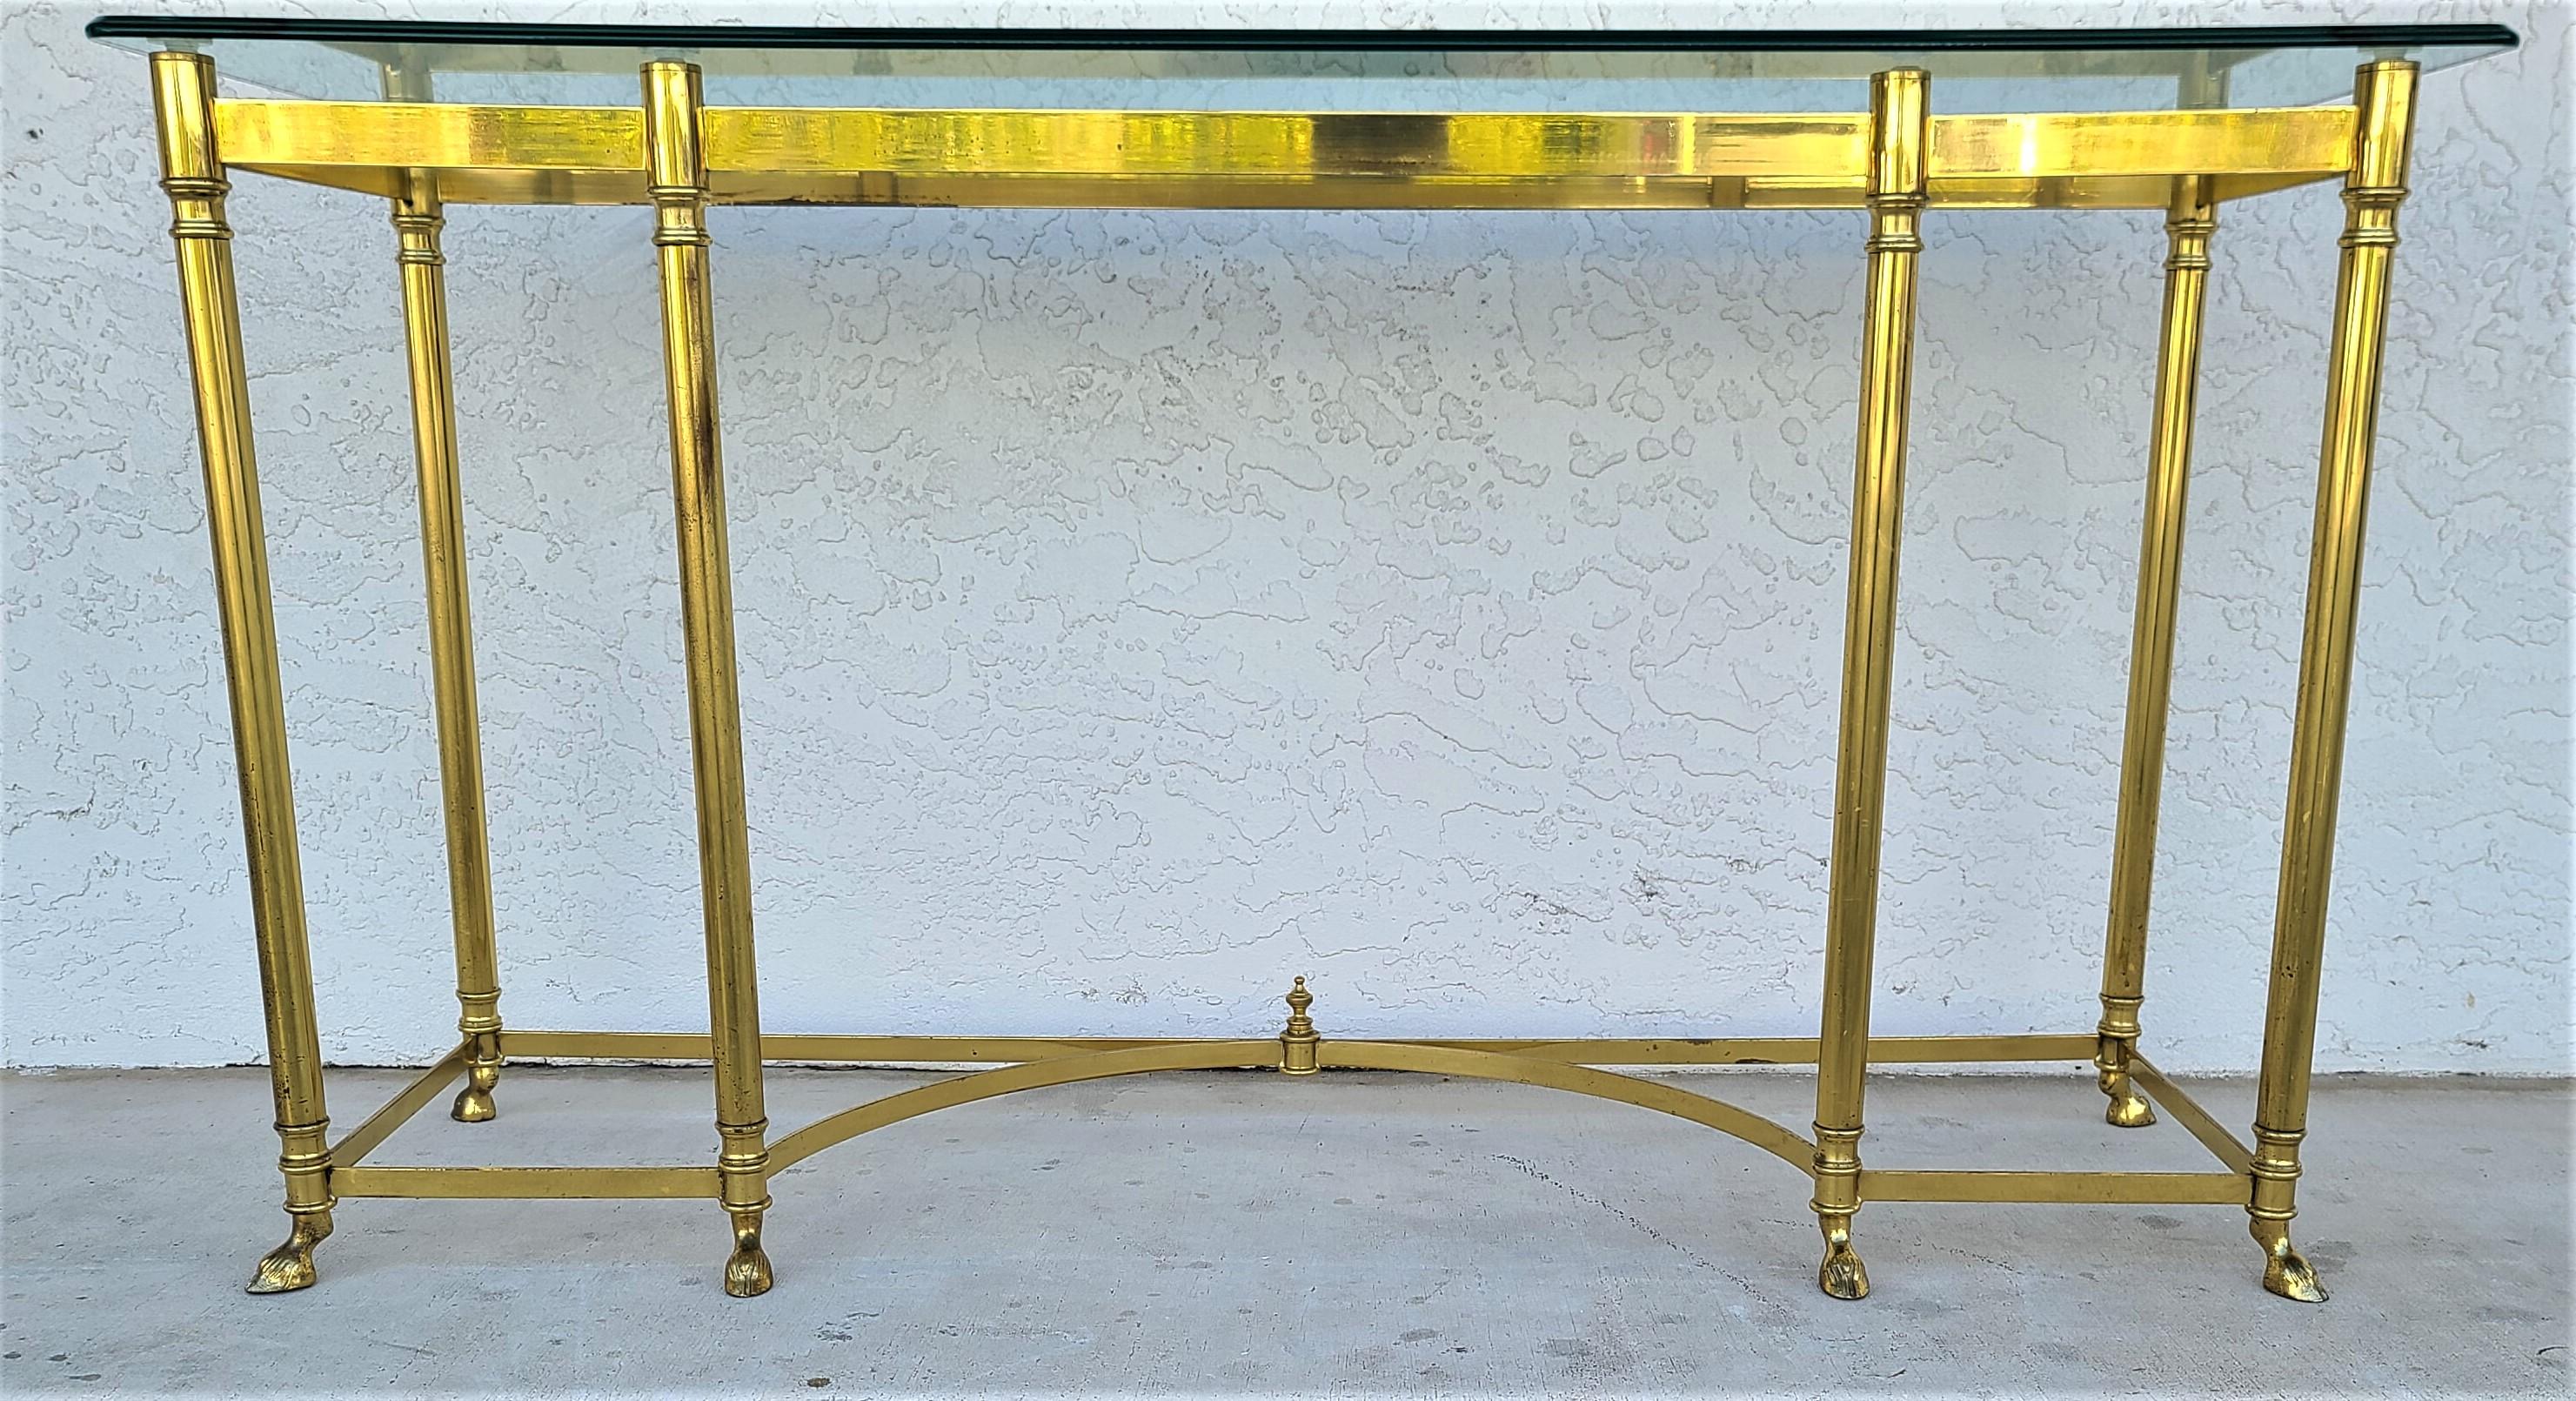 Offering one of our recent Palm Beach Estate fine furniture acquisitions of a
Vintage Hollywood Regency Labarge brass and beveled glass hoof feet console sofa table
With the original beveled ogee edge glass top 

Approximate measurements in